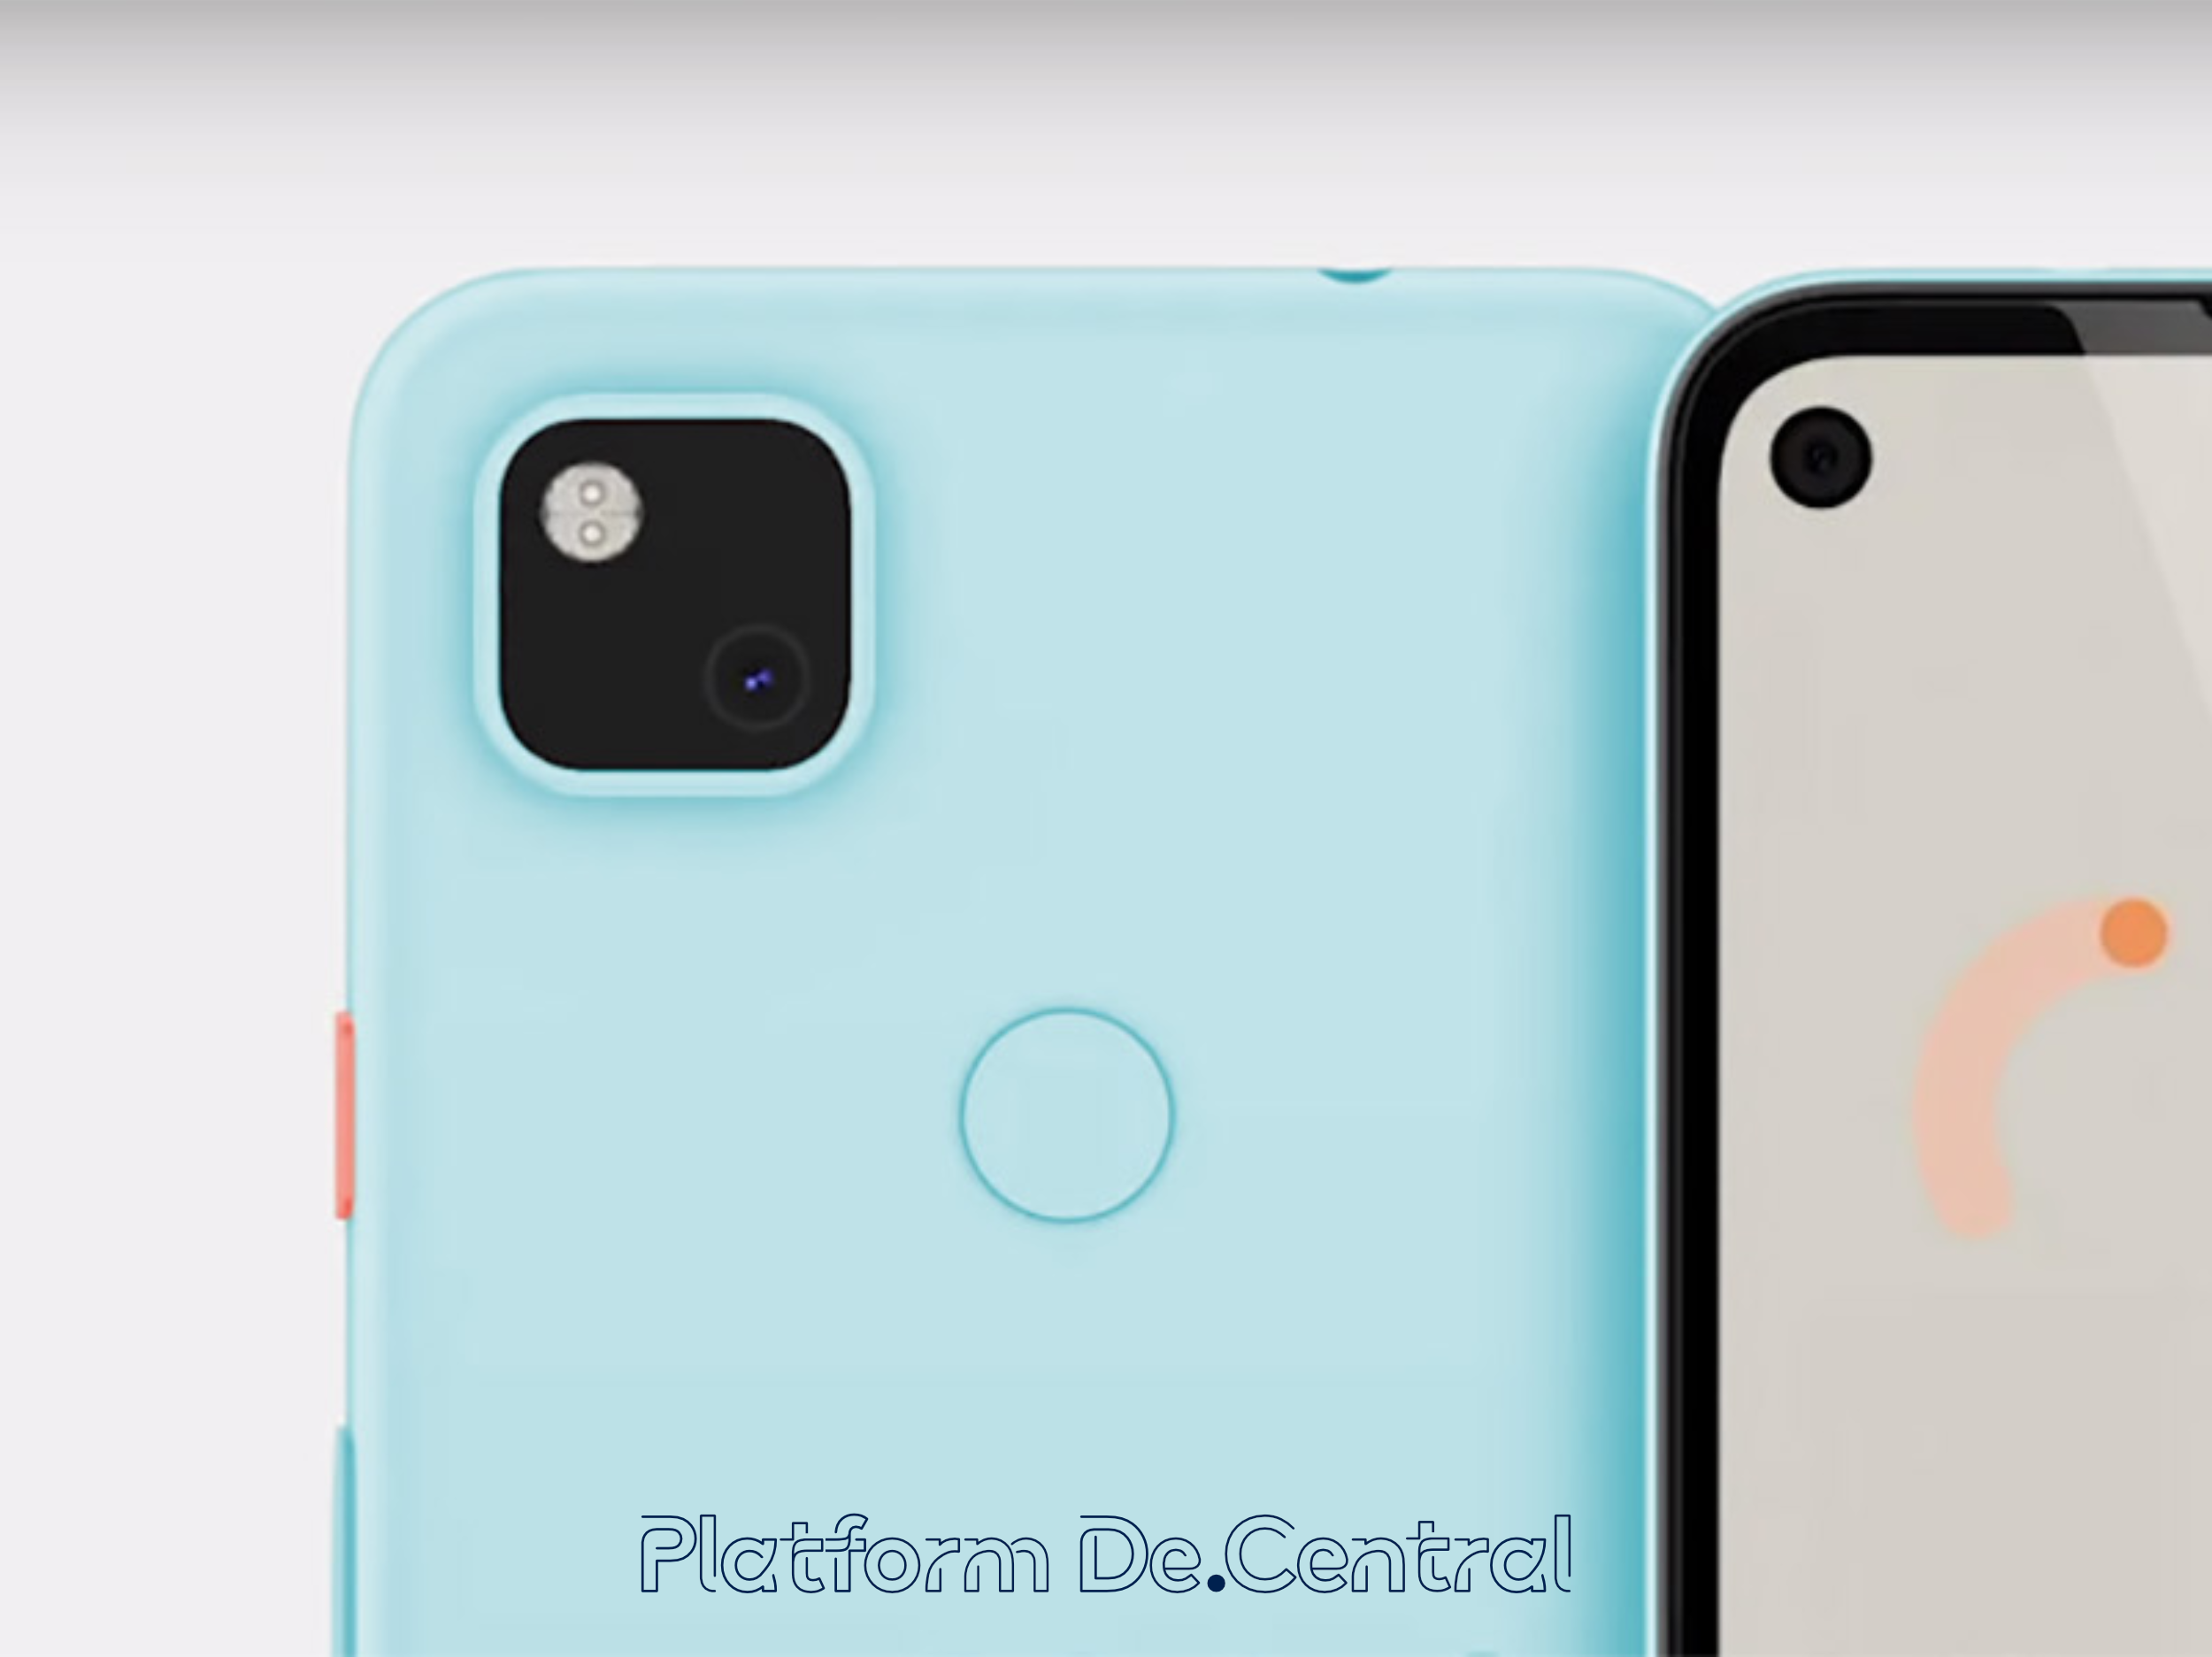 Pixel 4a Leaked in new Photos